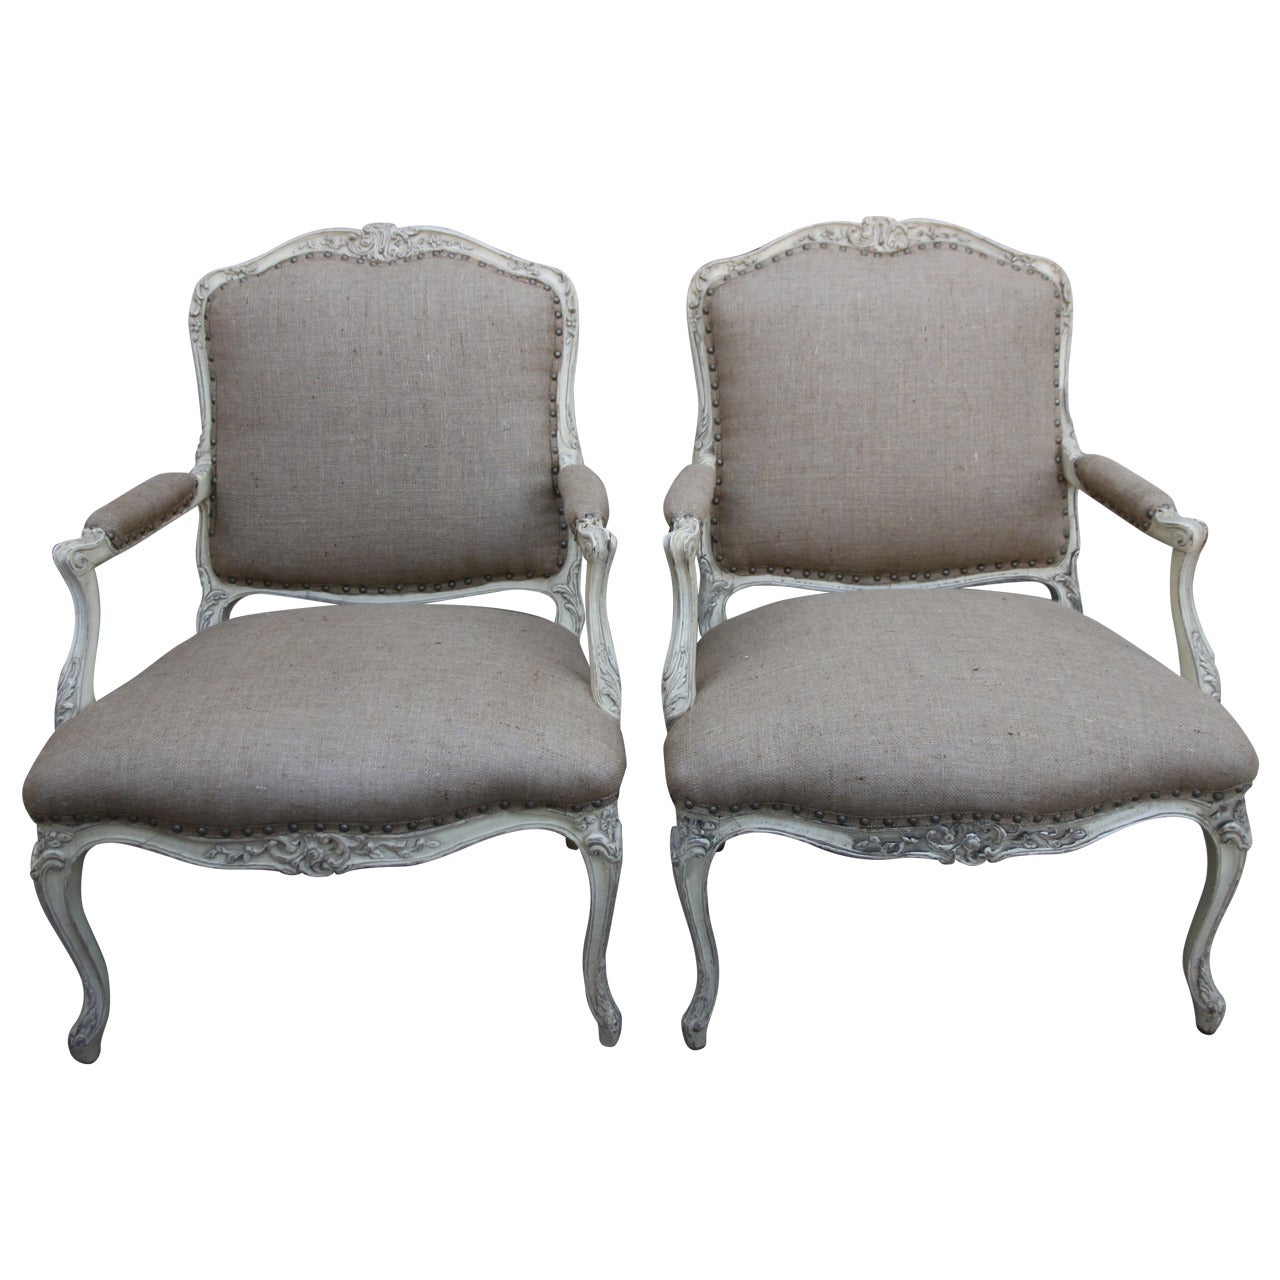 Pair of French Louis XV Style Painted Fauteils